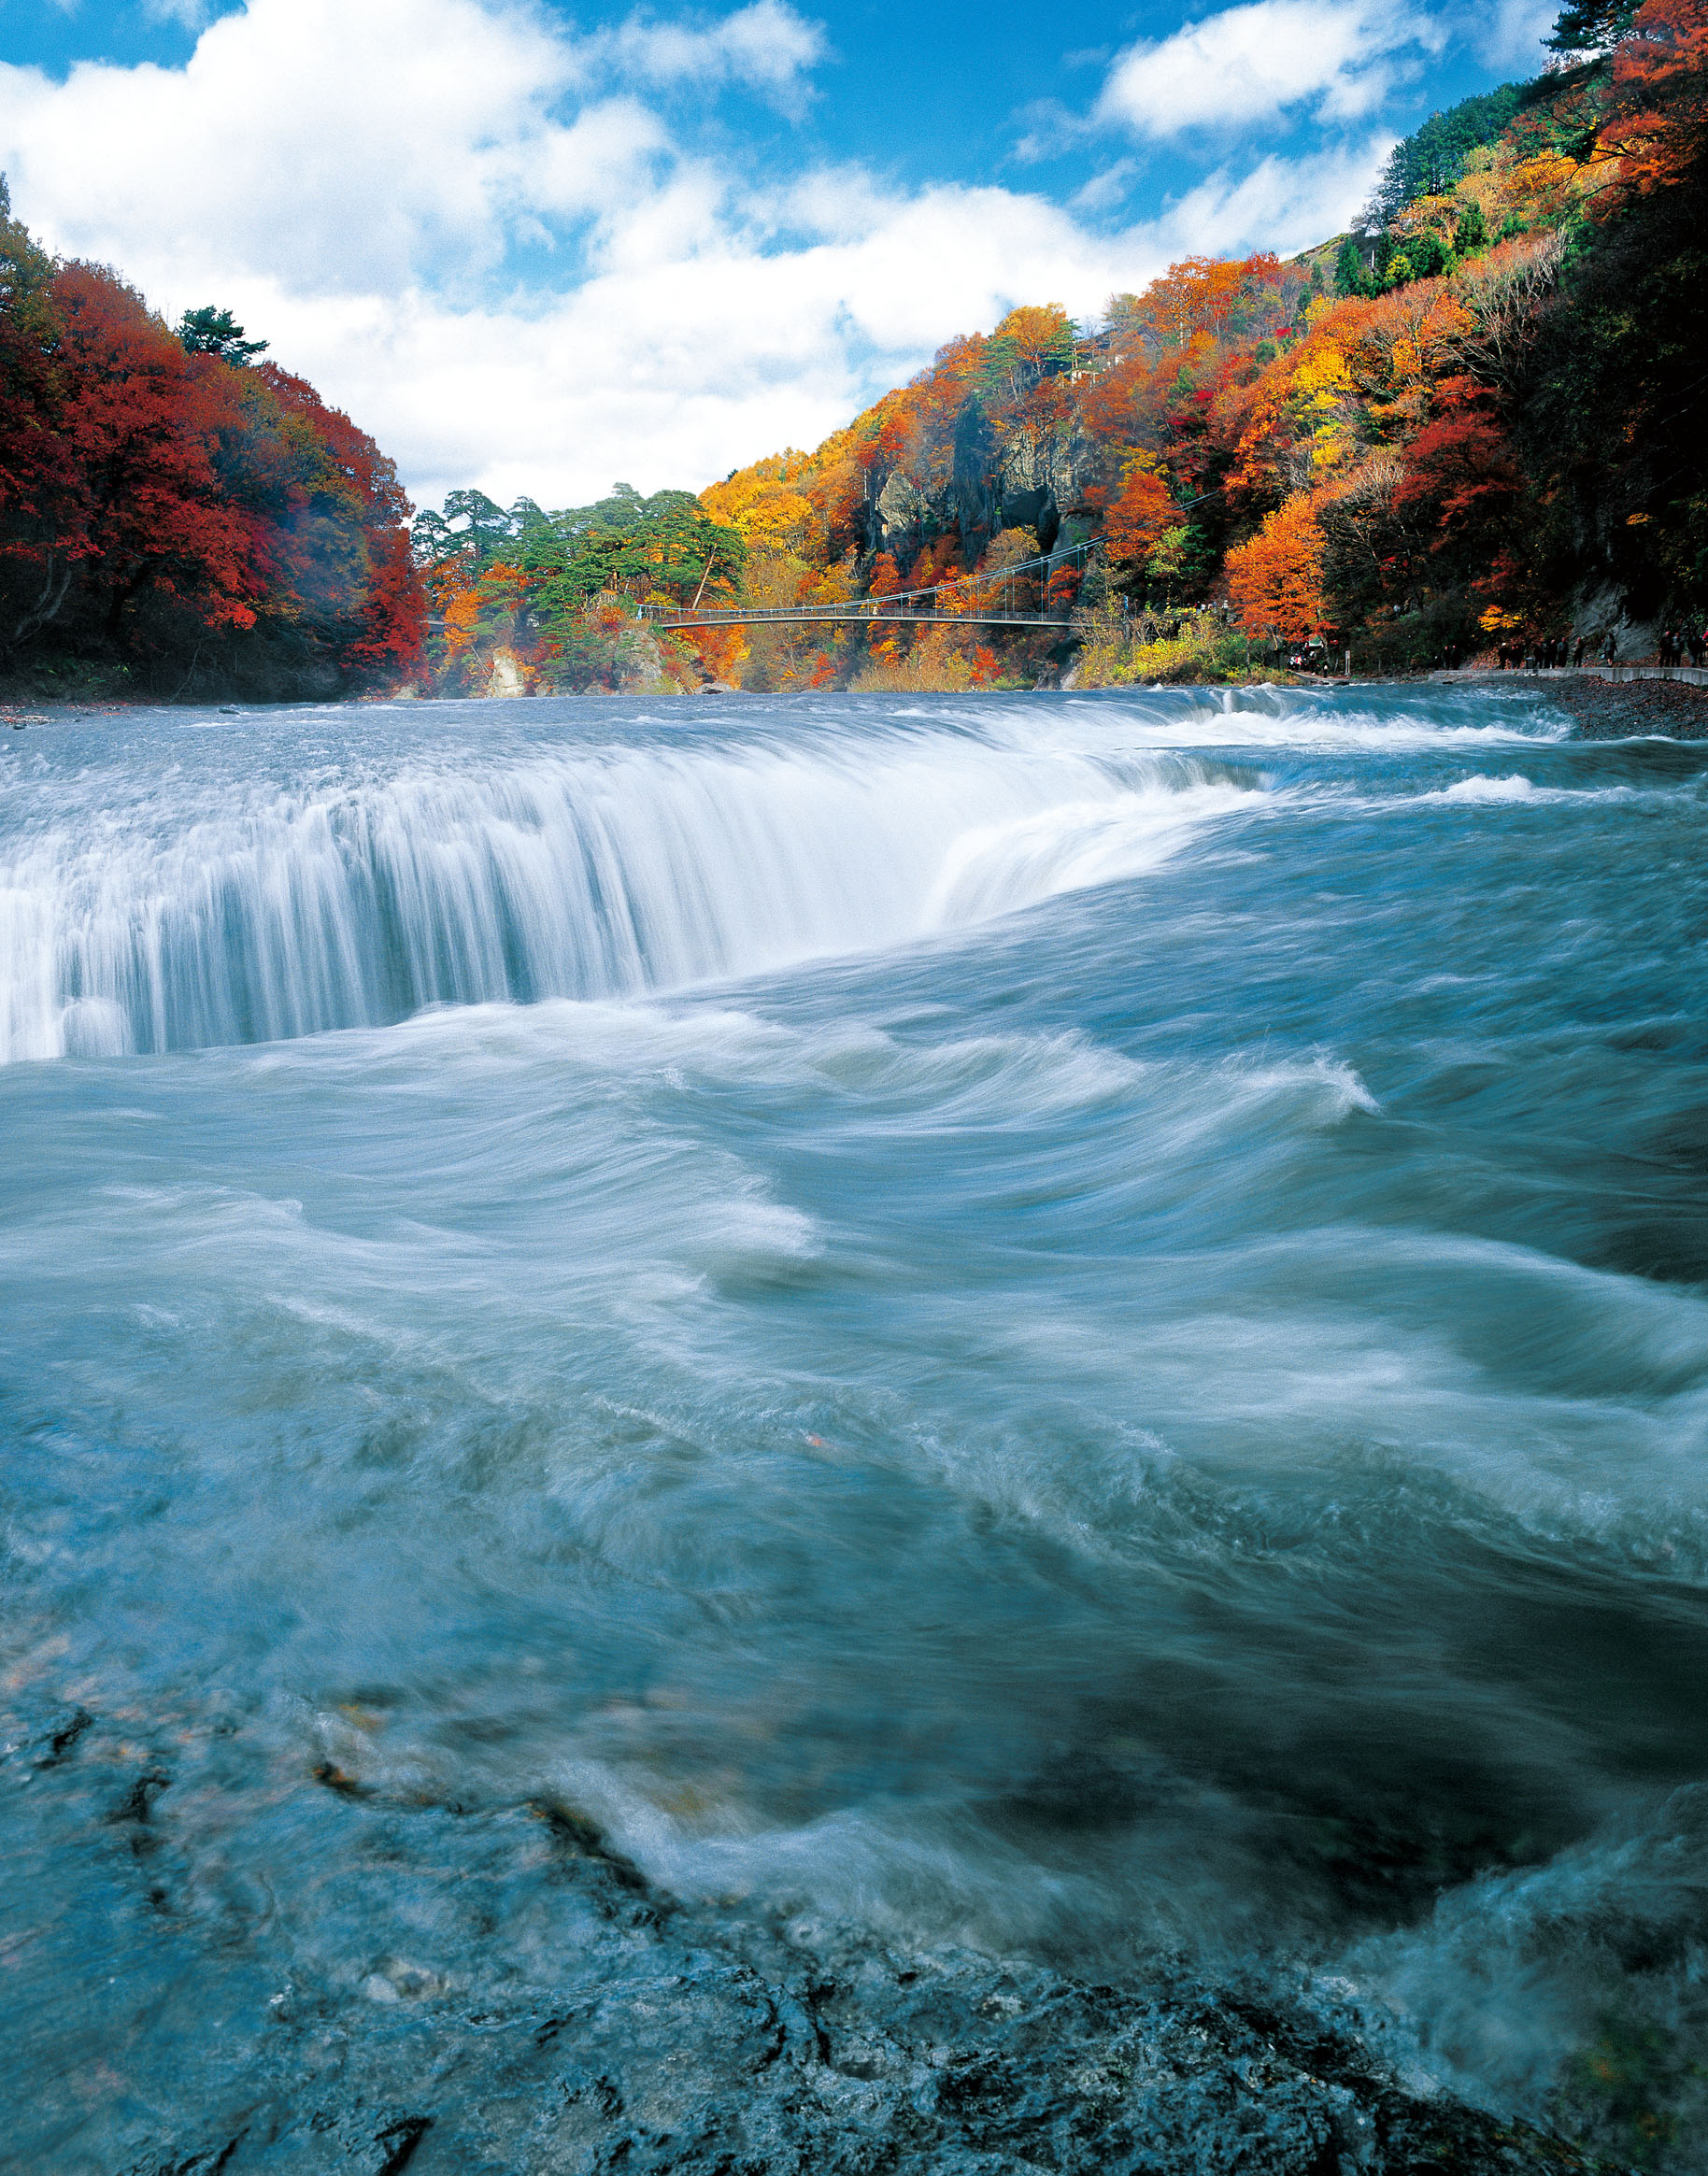 Fukiware Falls in autumn. A gorge colored by brocades enhances the magnificent stream.